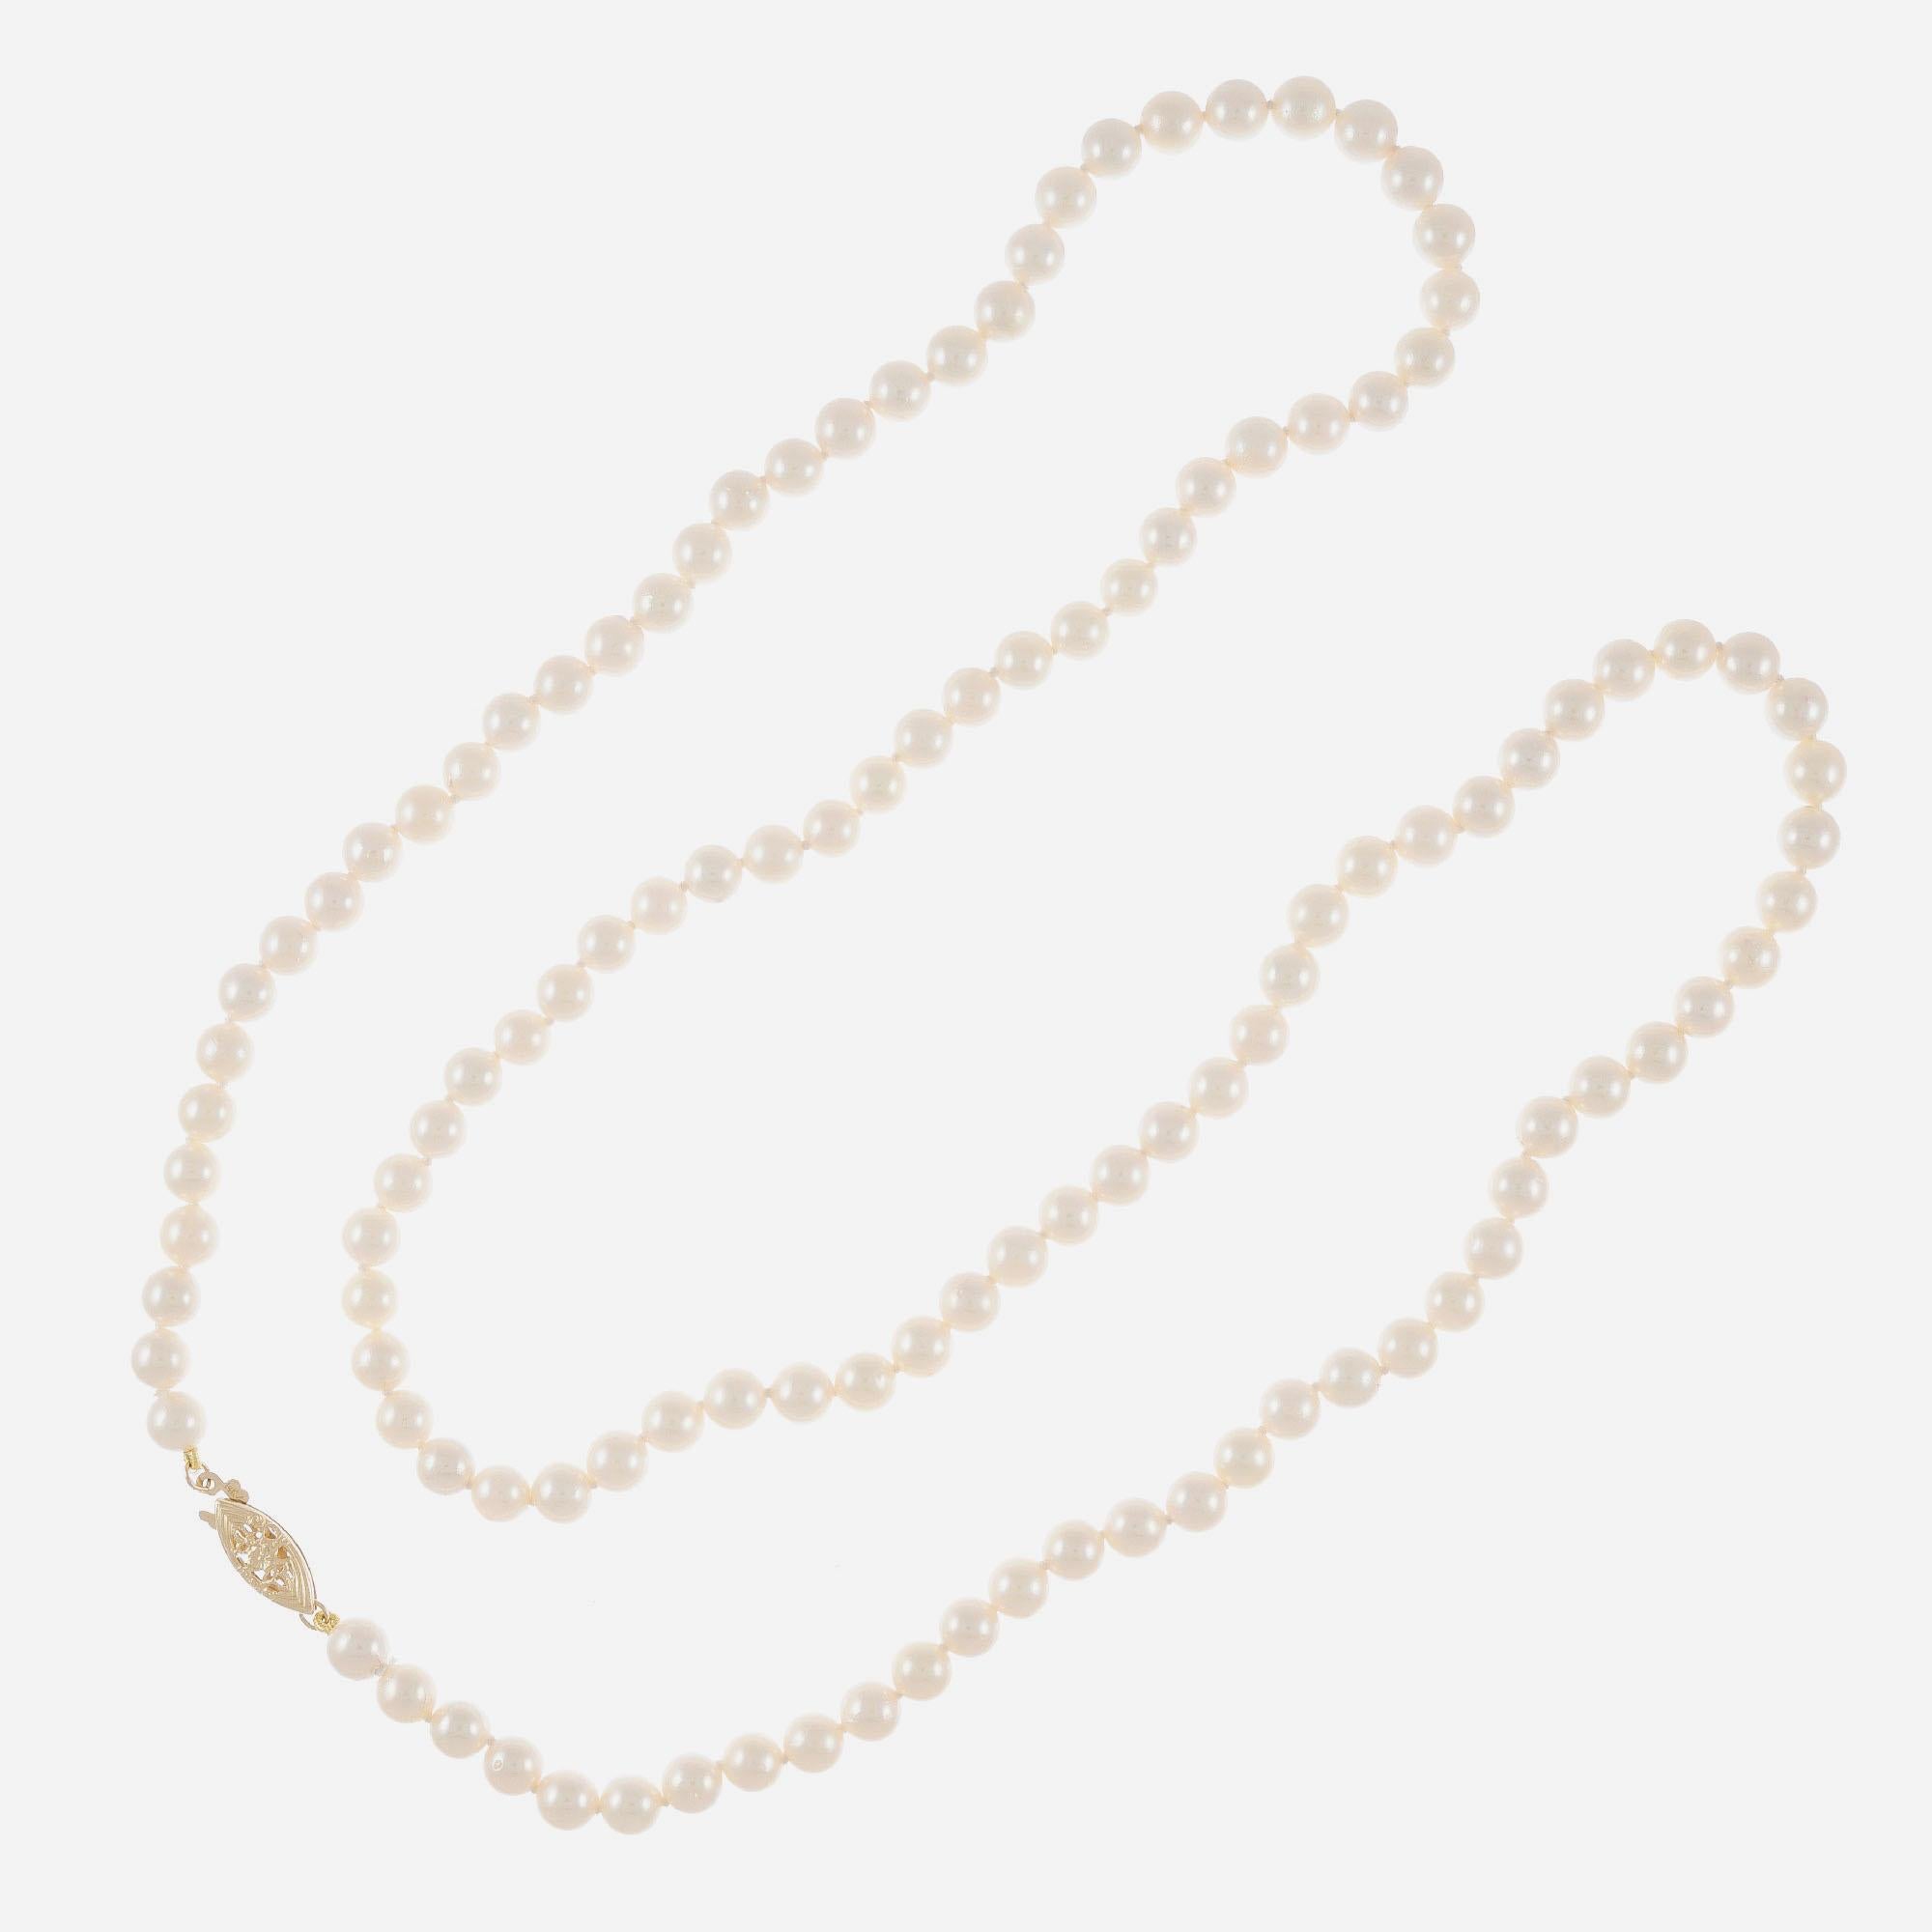 29 inch 5.5 to 6mm Japanese cultured pearl necklace. White with a touch of warm overtone freshly strung to a new 14k yellow gold catch. Very good lustre, few to moderate blemishes

118 cultured white with crème hue, 5.5-6mm
14k yellow gold 
Stamped: